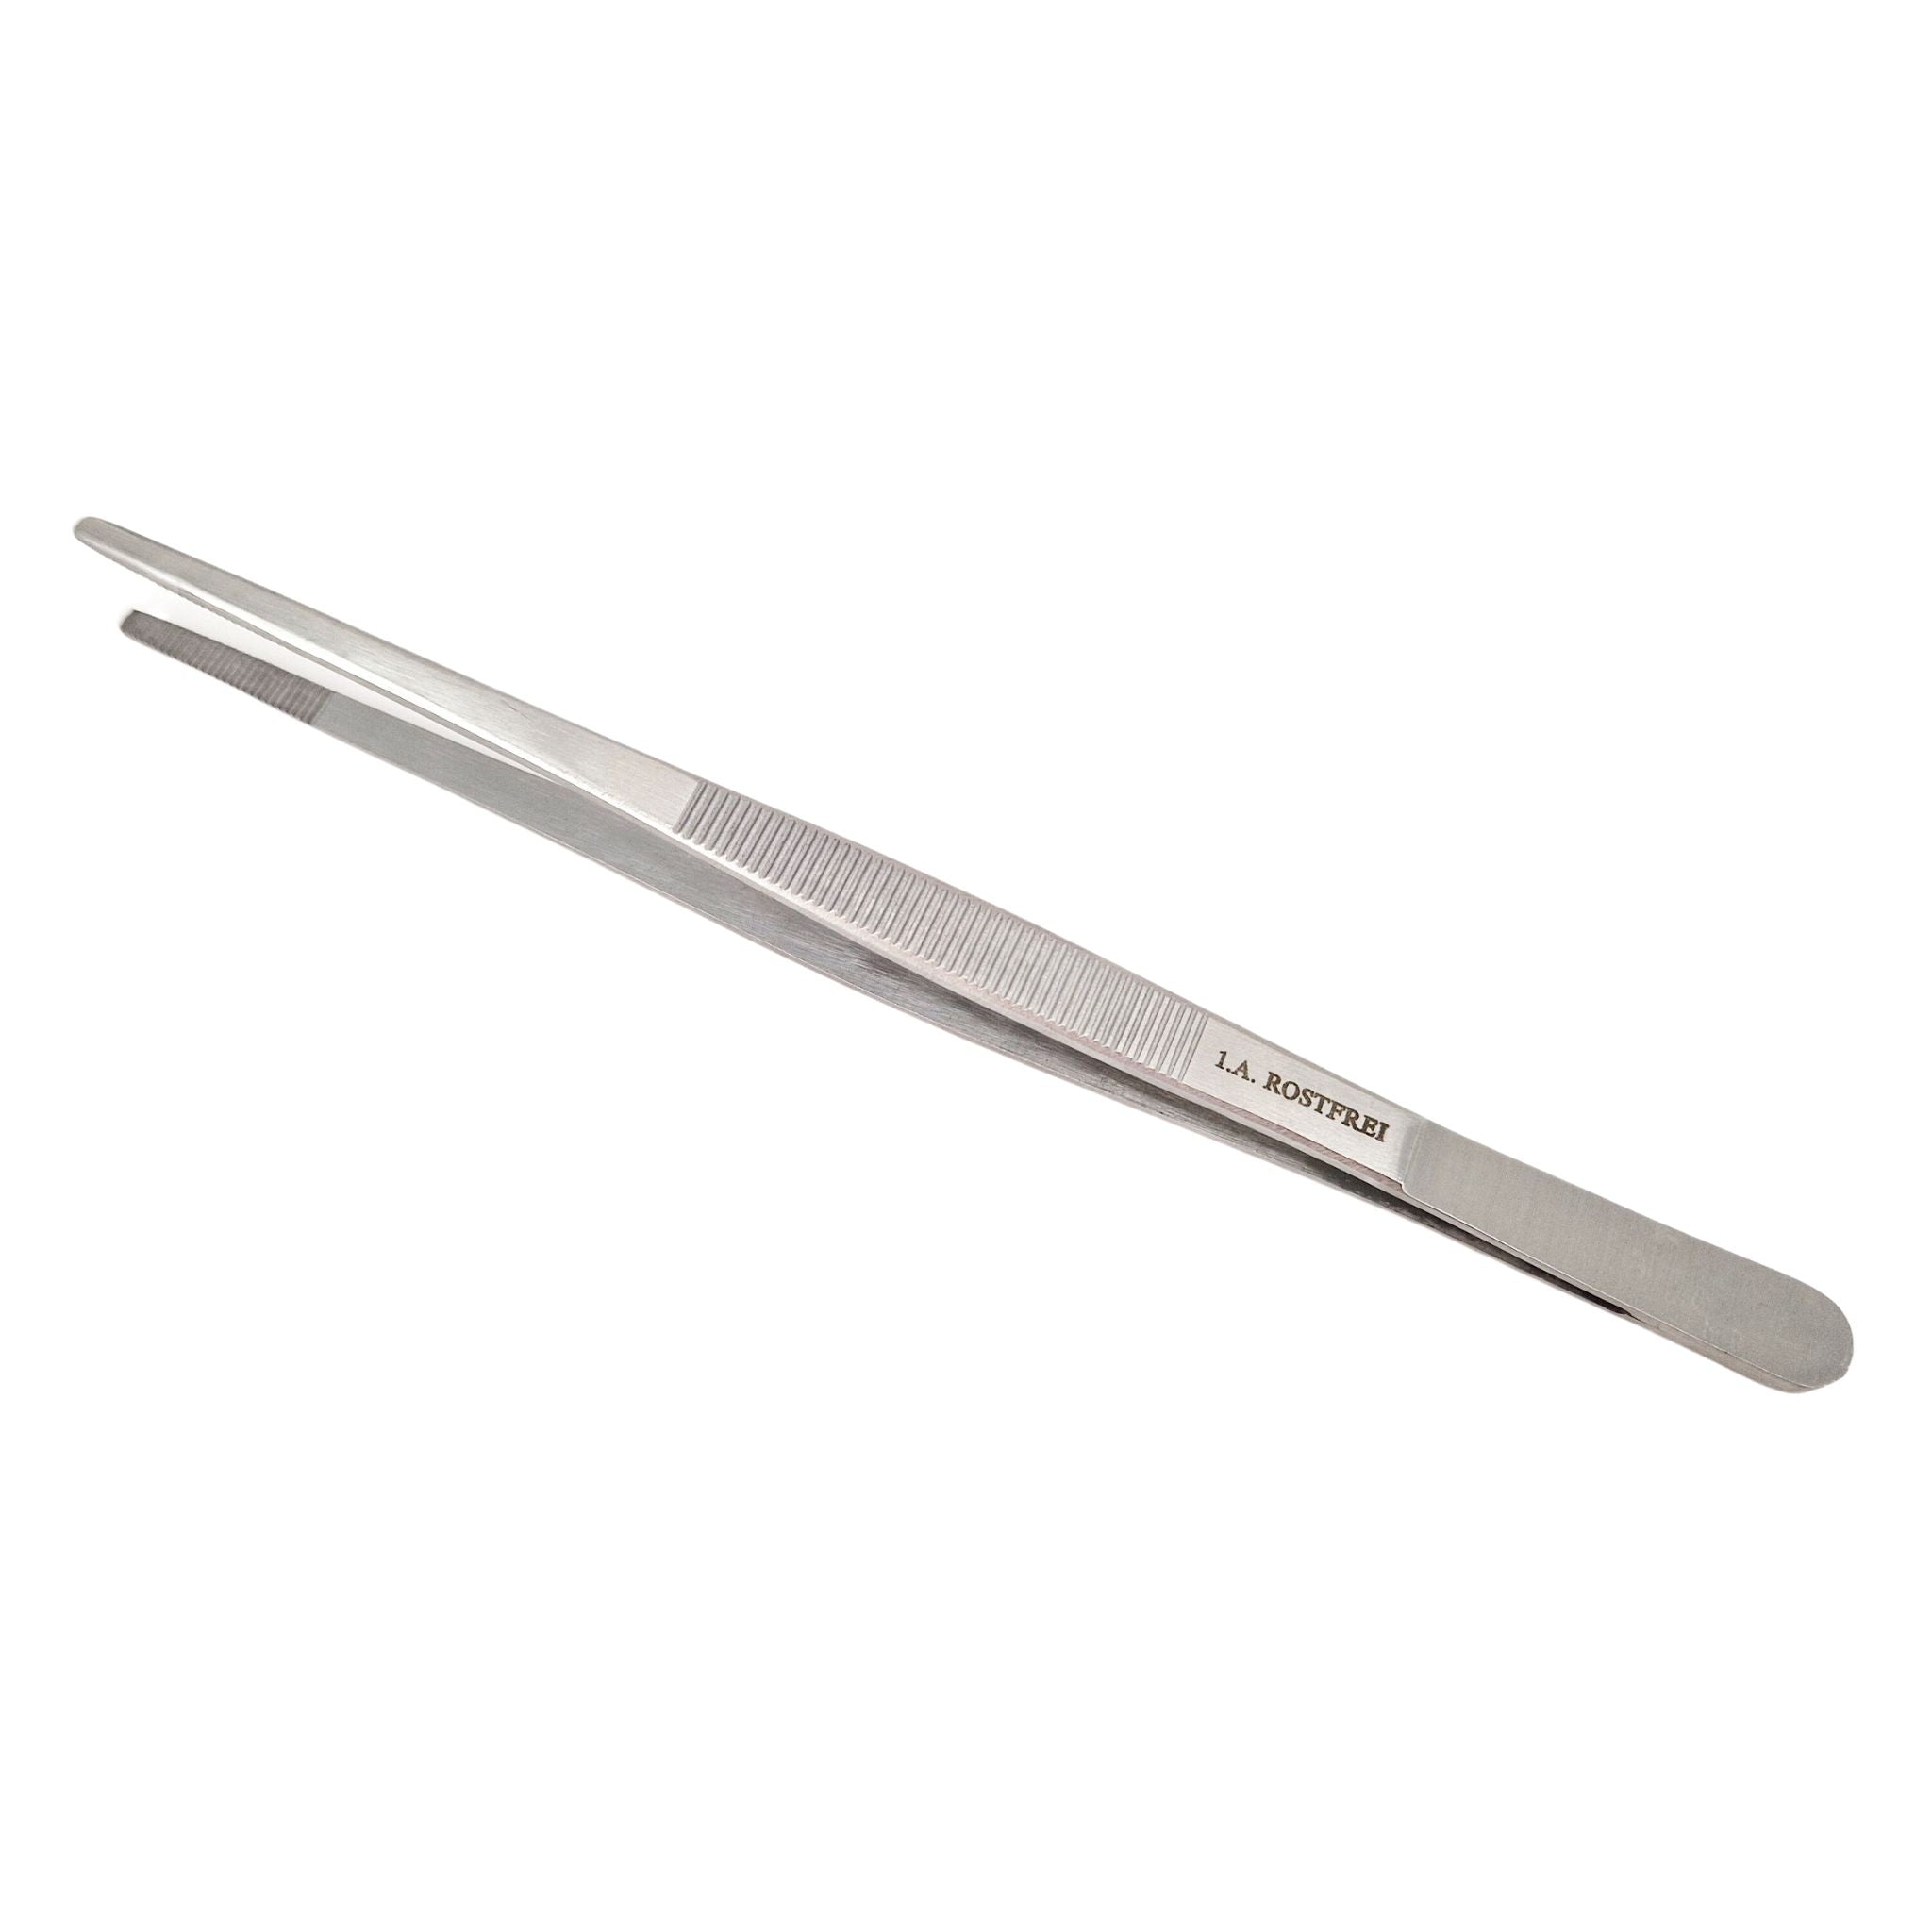 Lavabis dissecting forceps blunt stainless steel